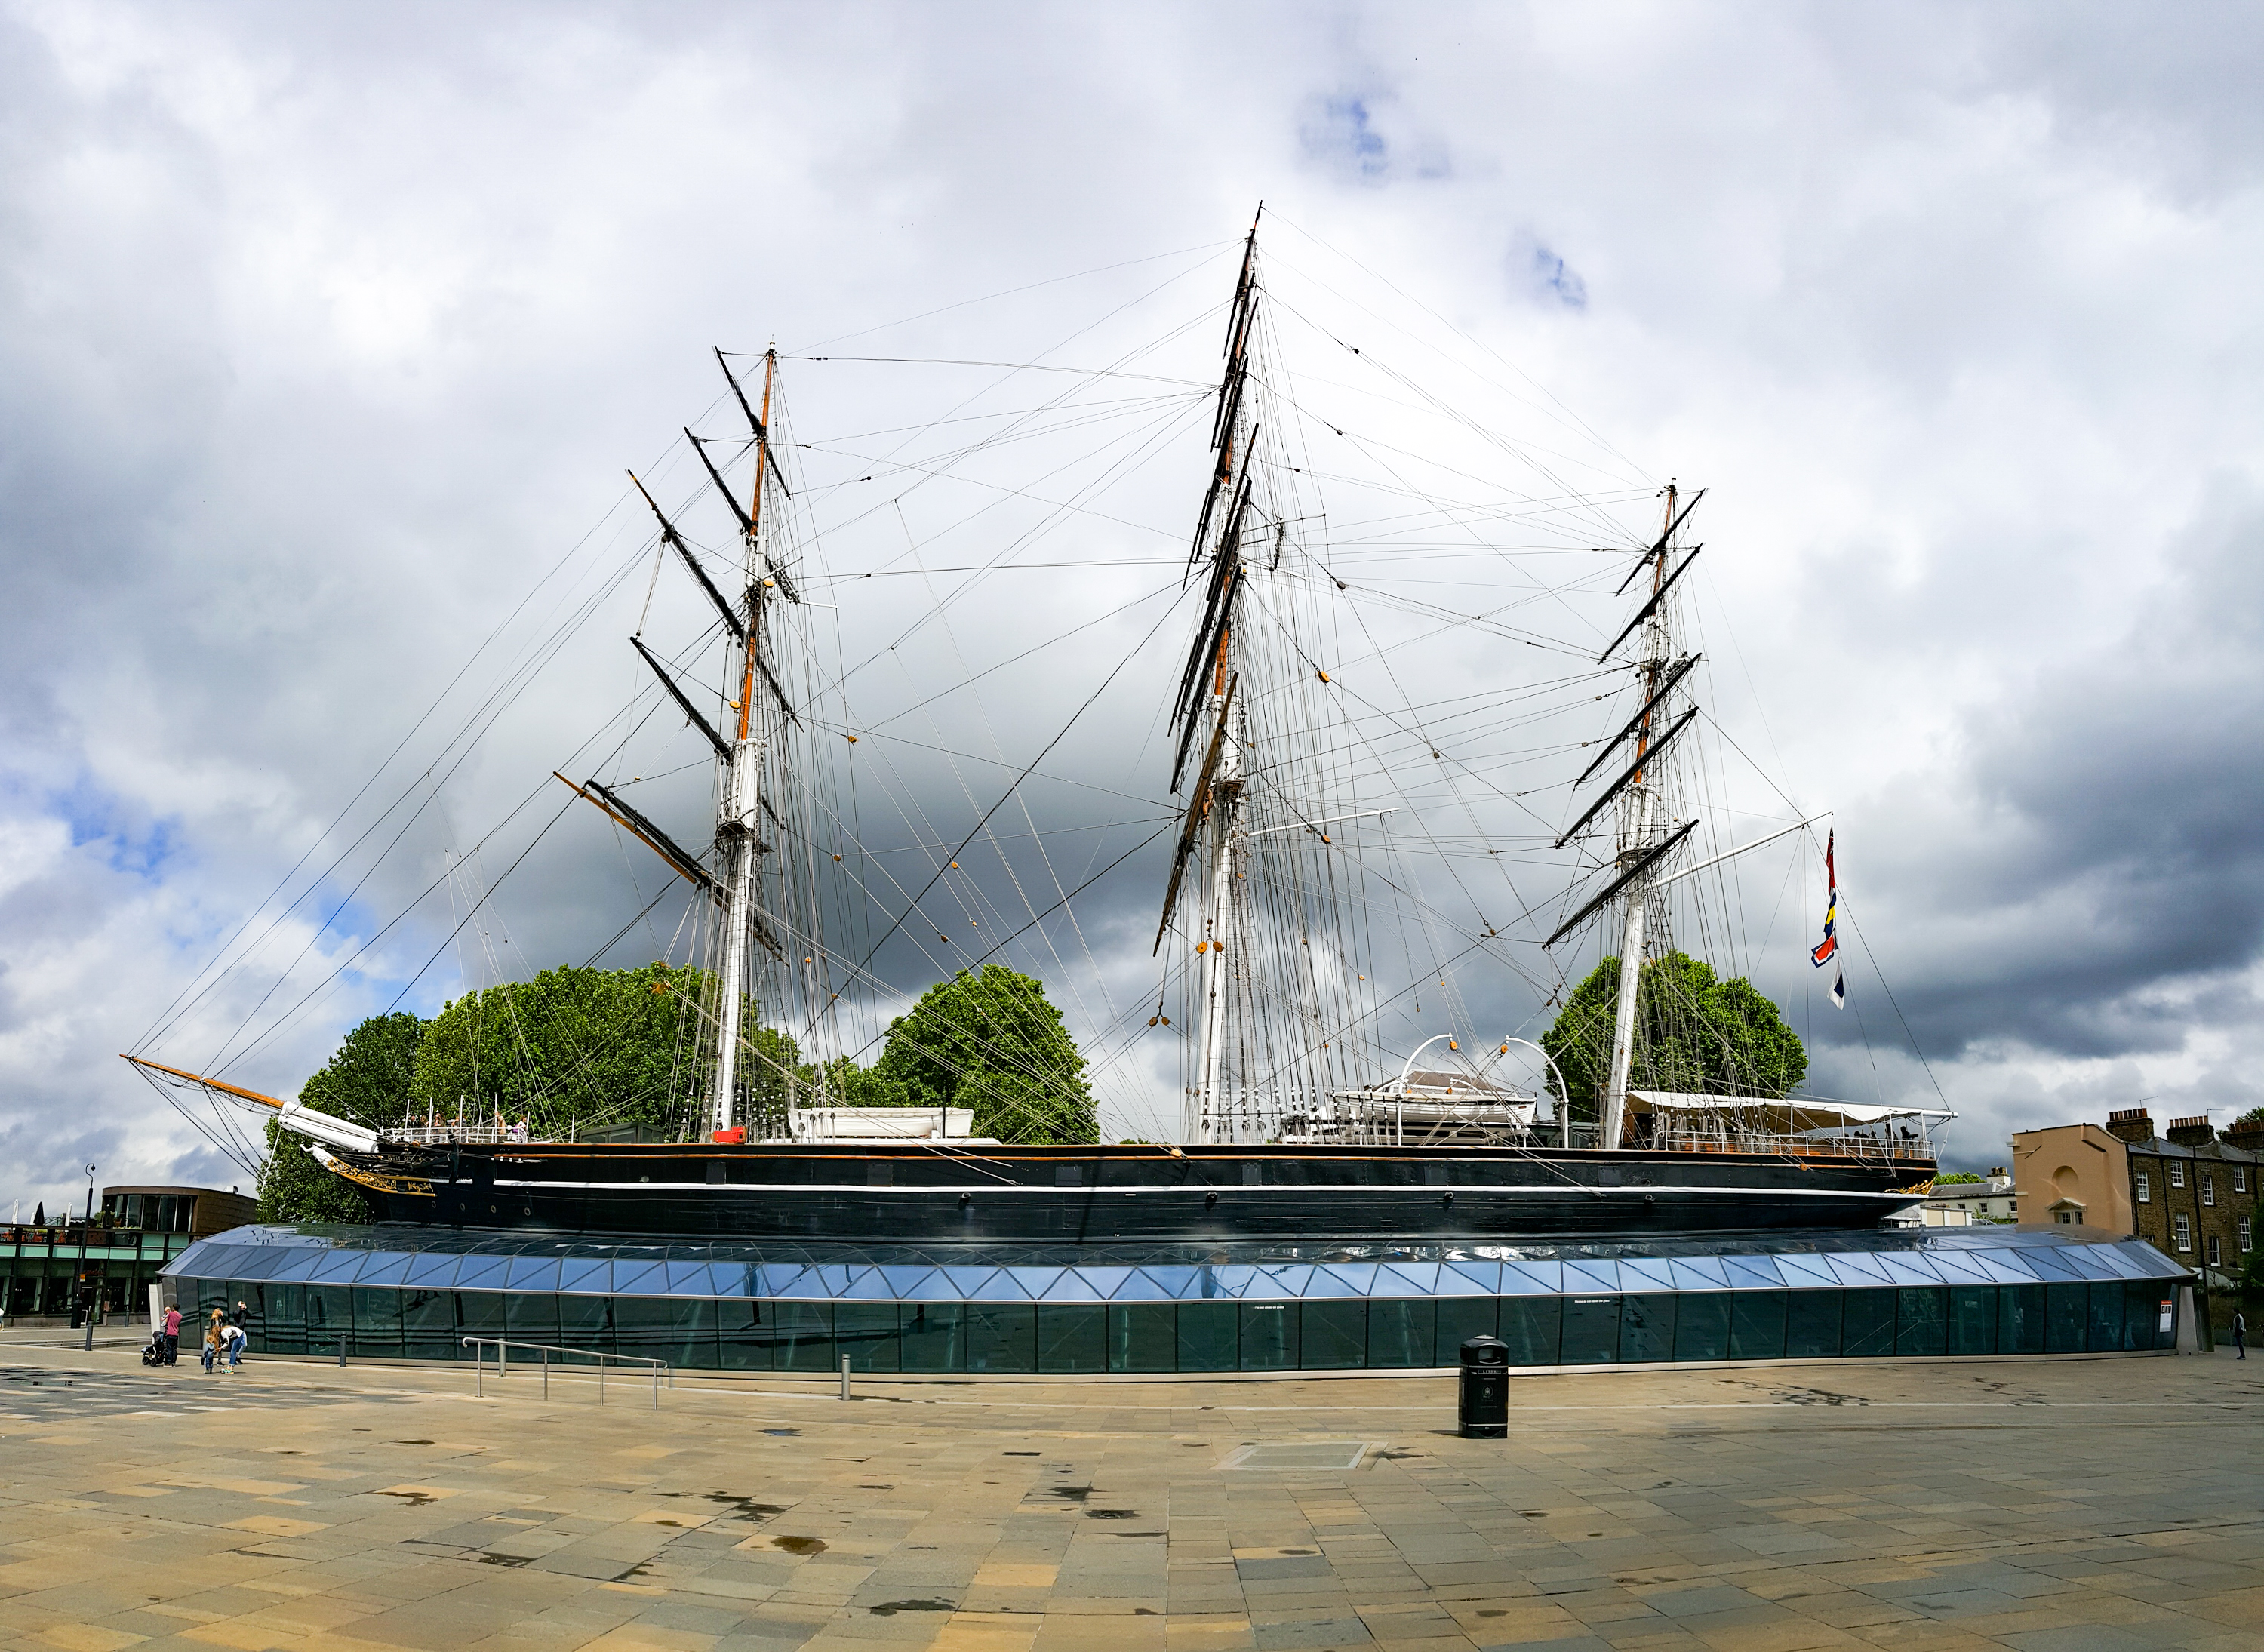 Validering Skærpe Enkelhed Cutty Sark: A tour of 147 years of sailing history - CNET